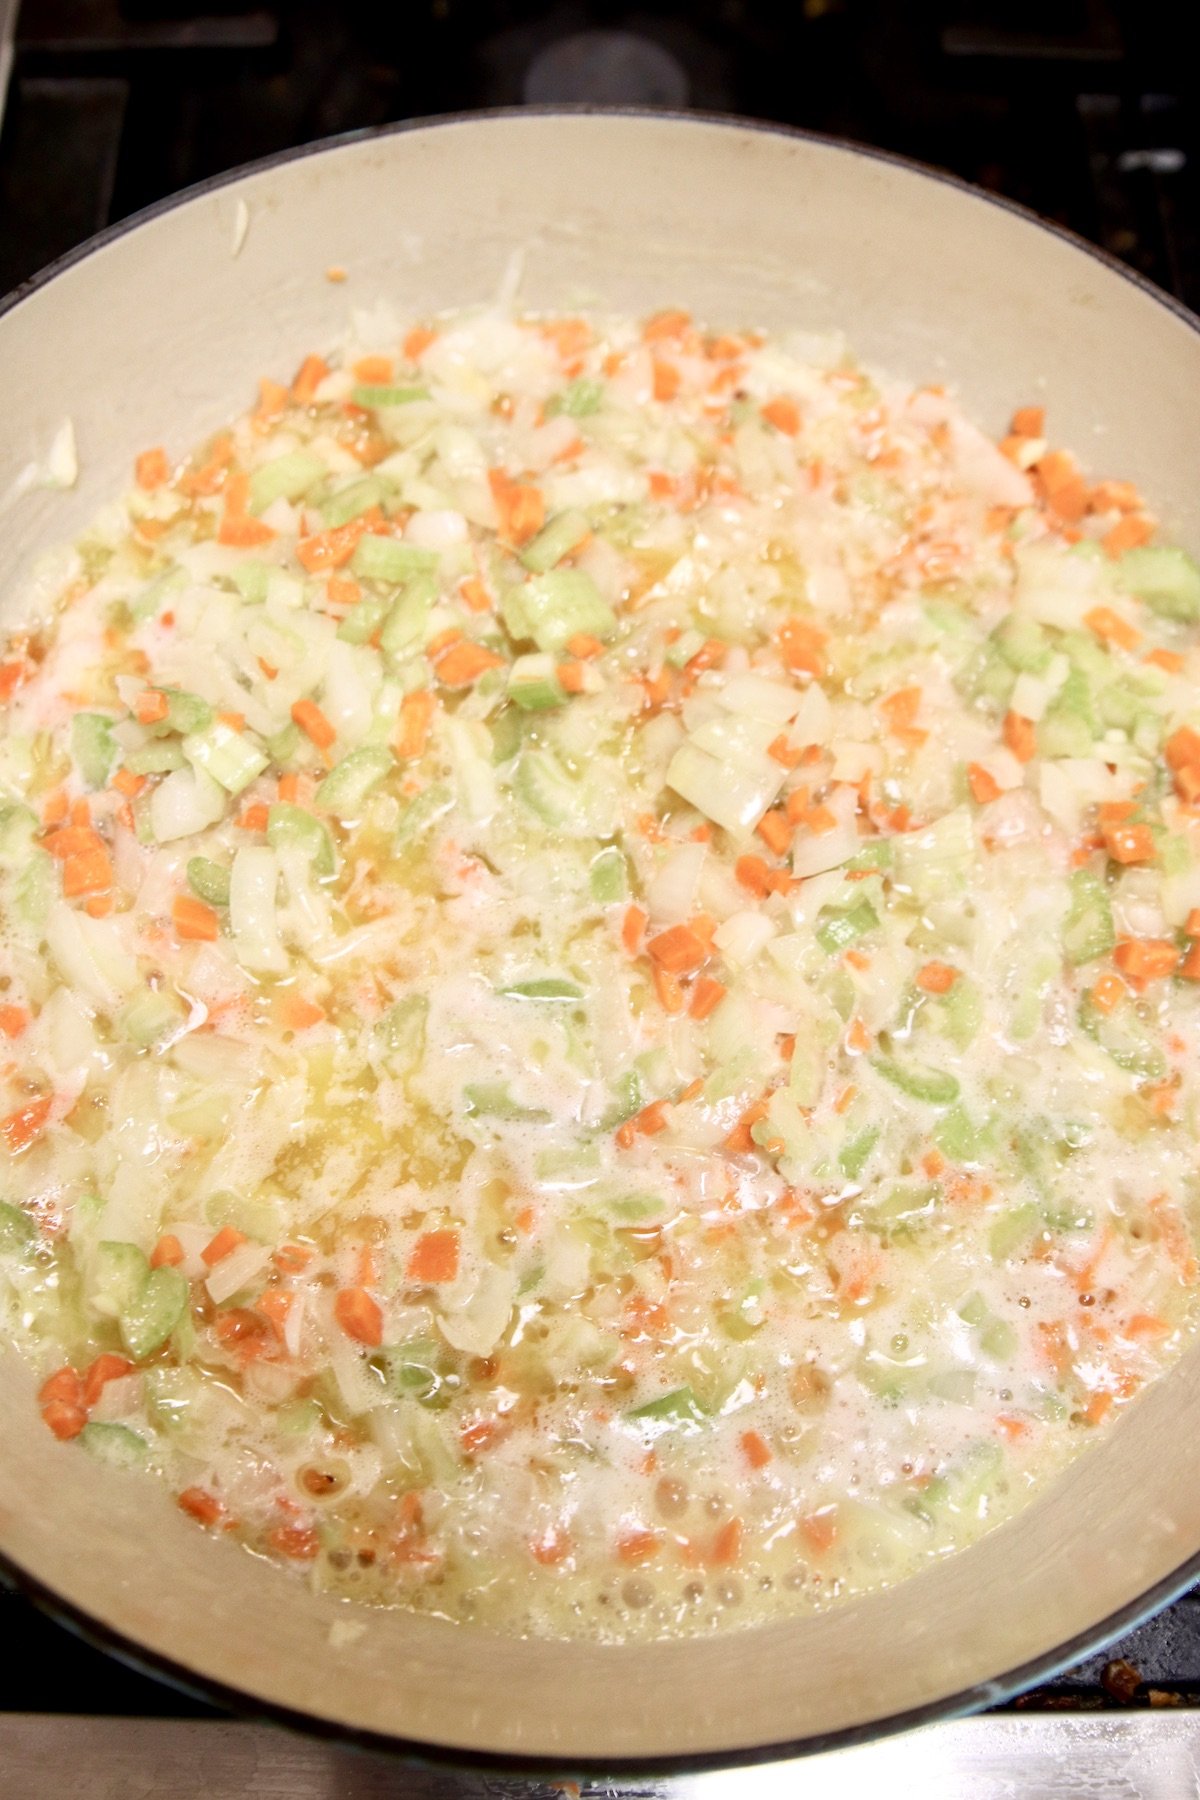 cooking onions, carrots, celery in butter